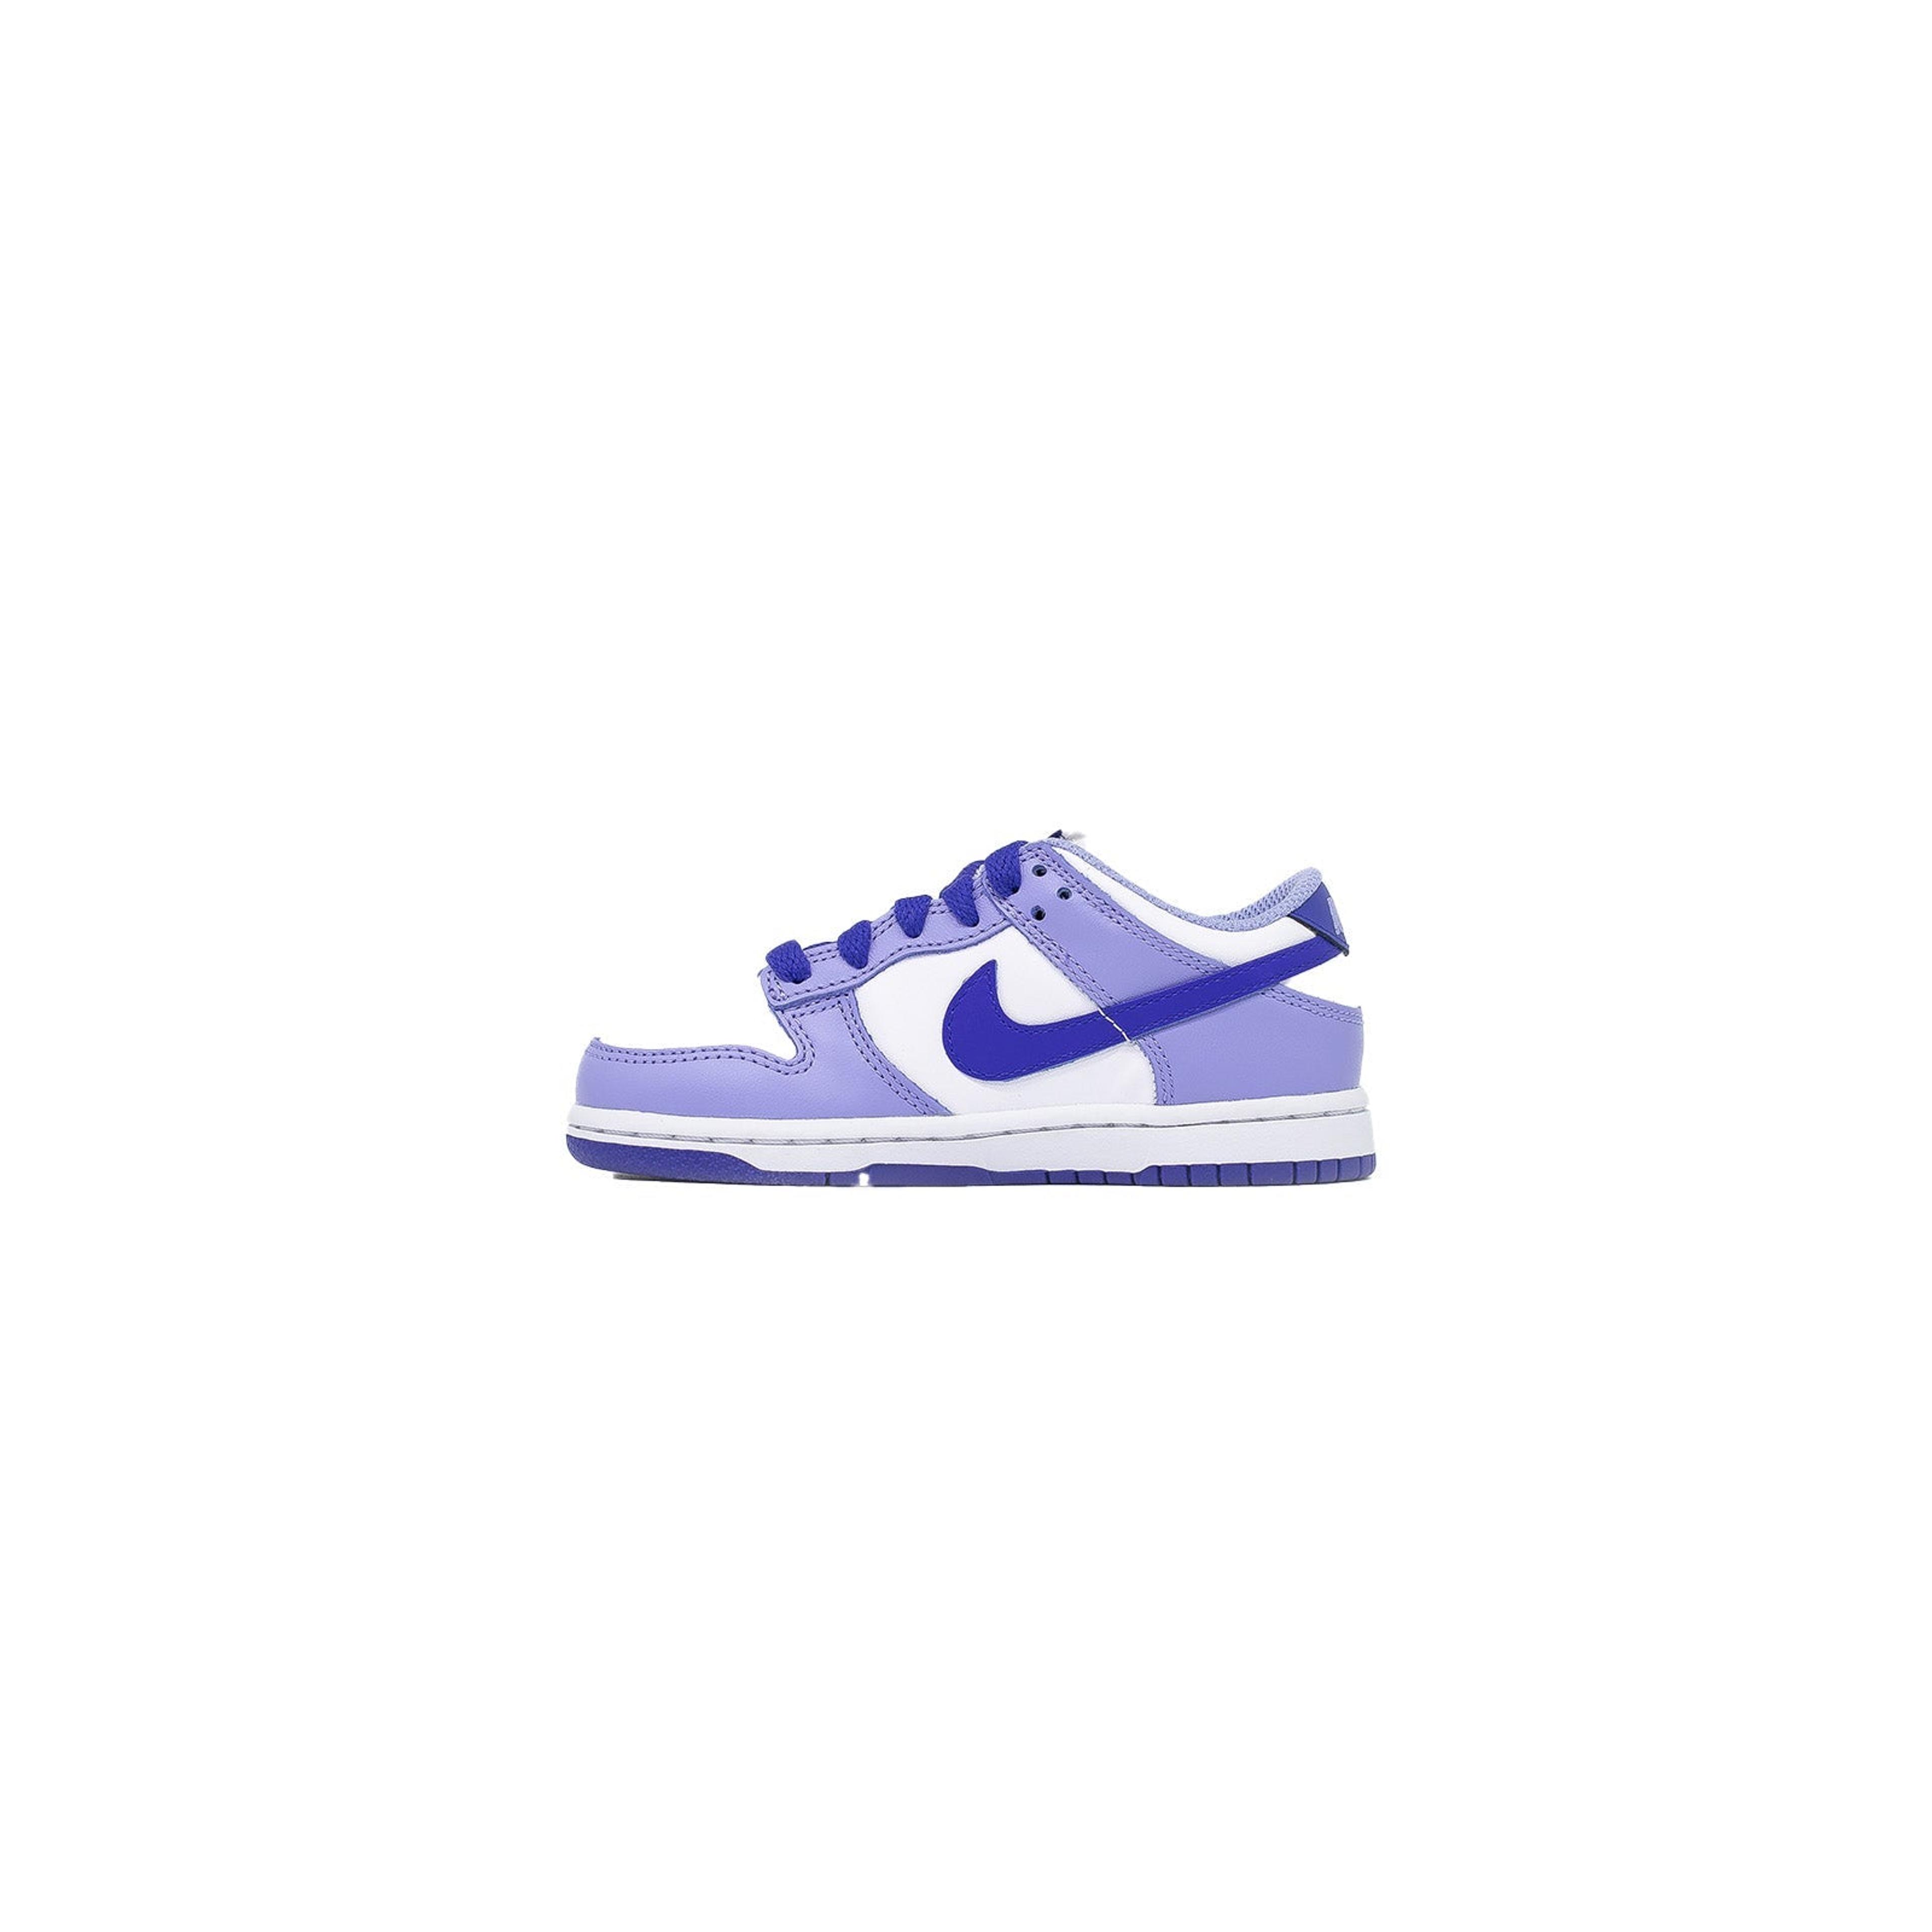 Alternate View 1 of Nike Dunk Low (PS), Blueberry